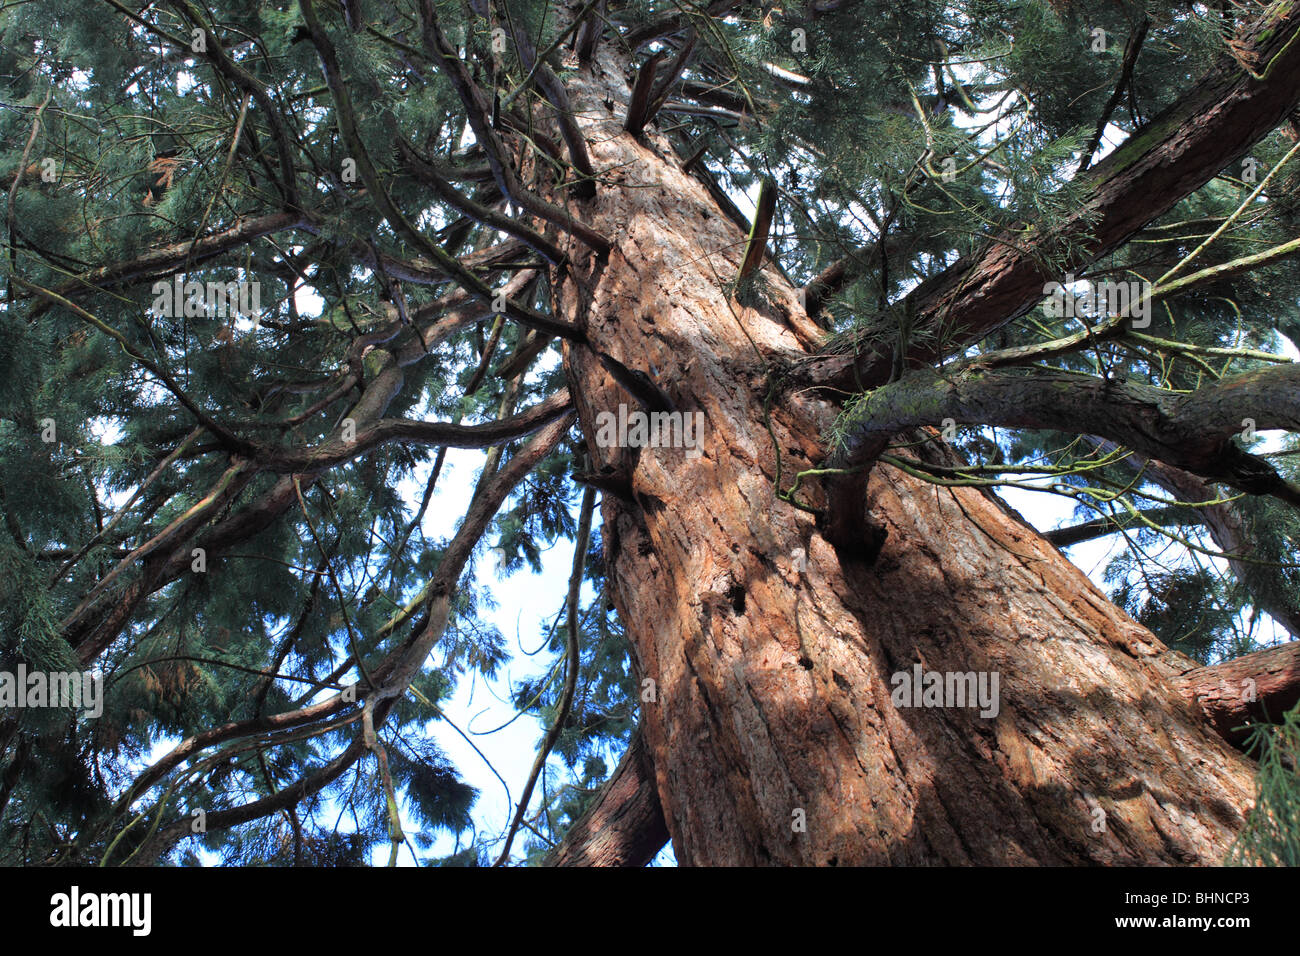 Giant Sequoia (Sequoiadendron giganteum) in the North American planting at Valley Gardens, Virginia Water, Windsor Great Park, Berkshire, England, UK Stock Photo